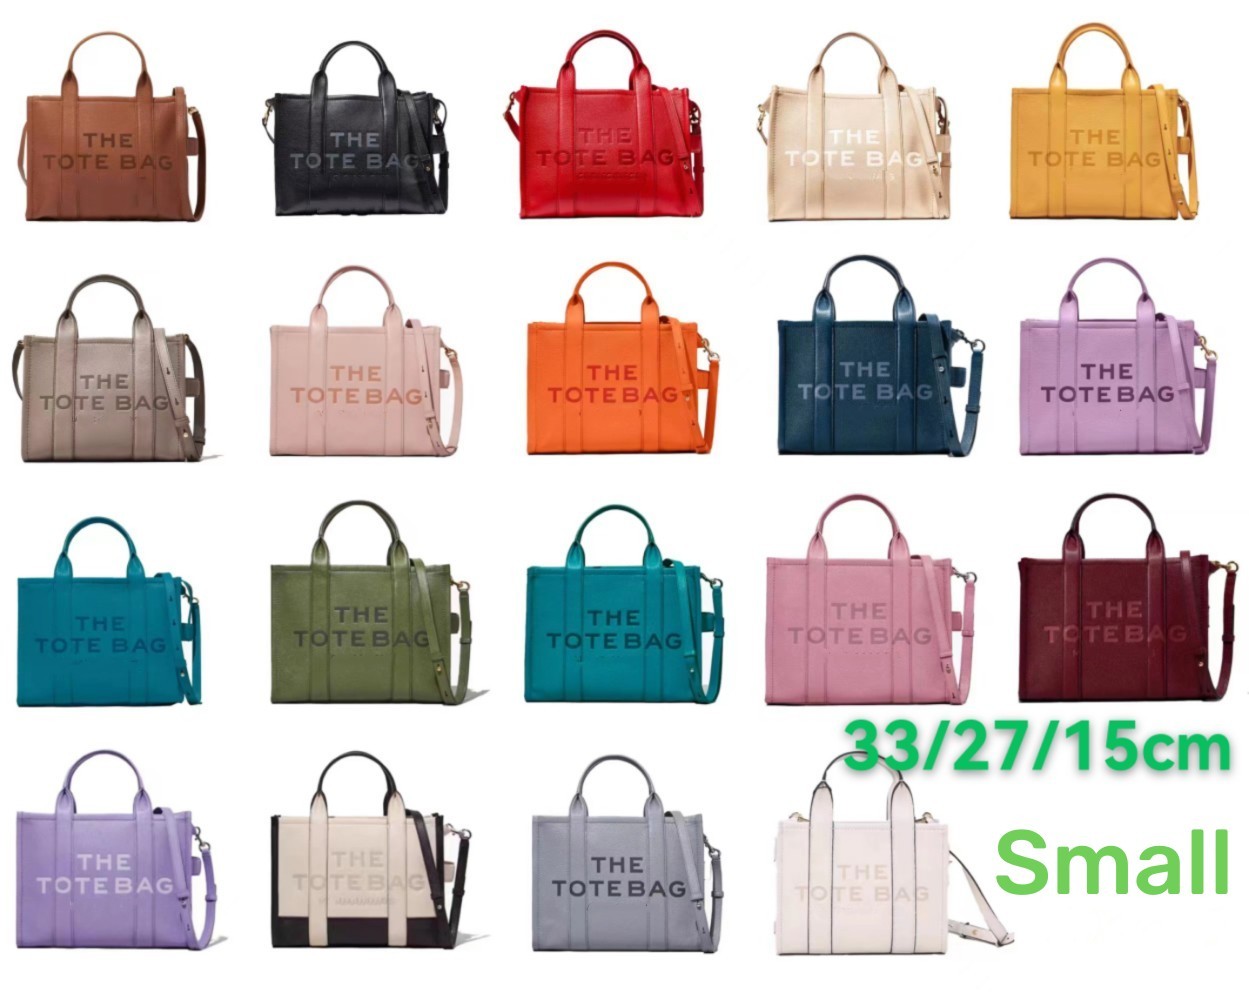 Womens Totes Bags Mini-18cm Small-24cm Medium-32cm with Shoulder strap Bag Canvas/Leather Woody Tote Handbags L0092